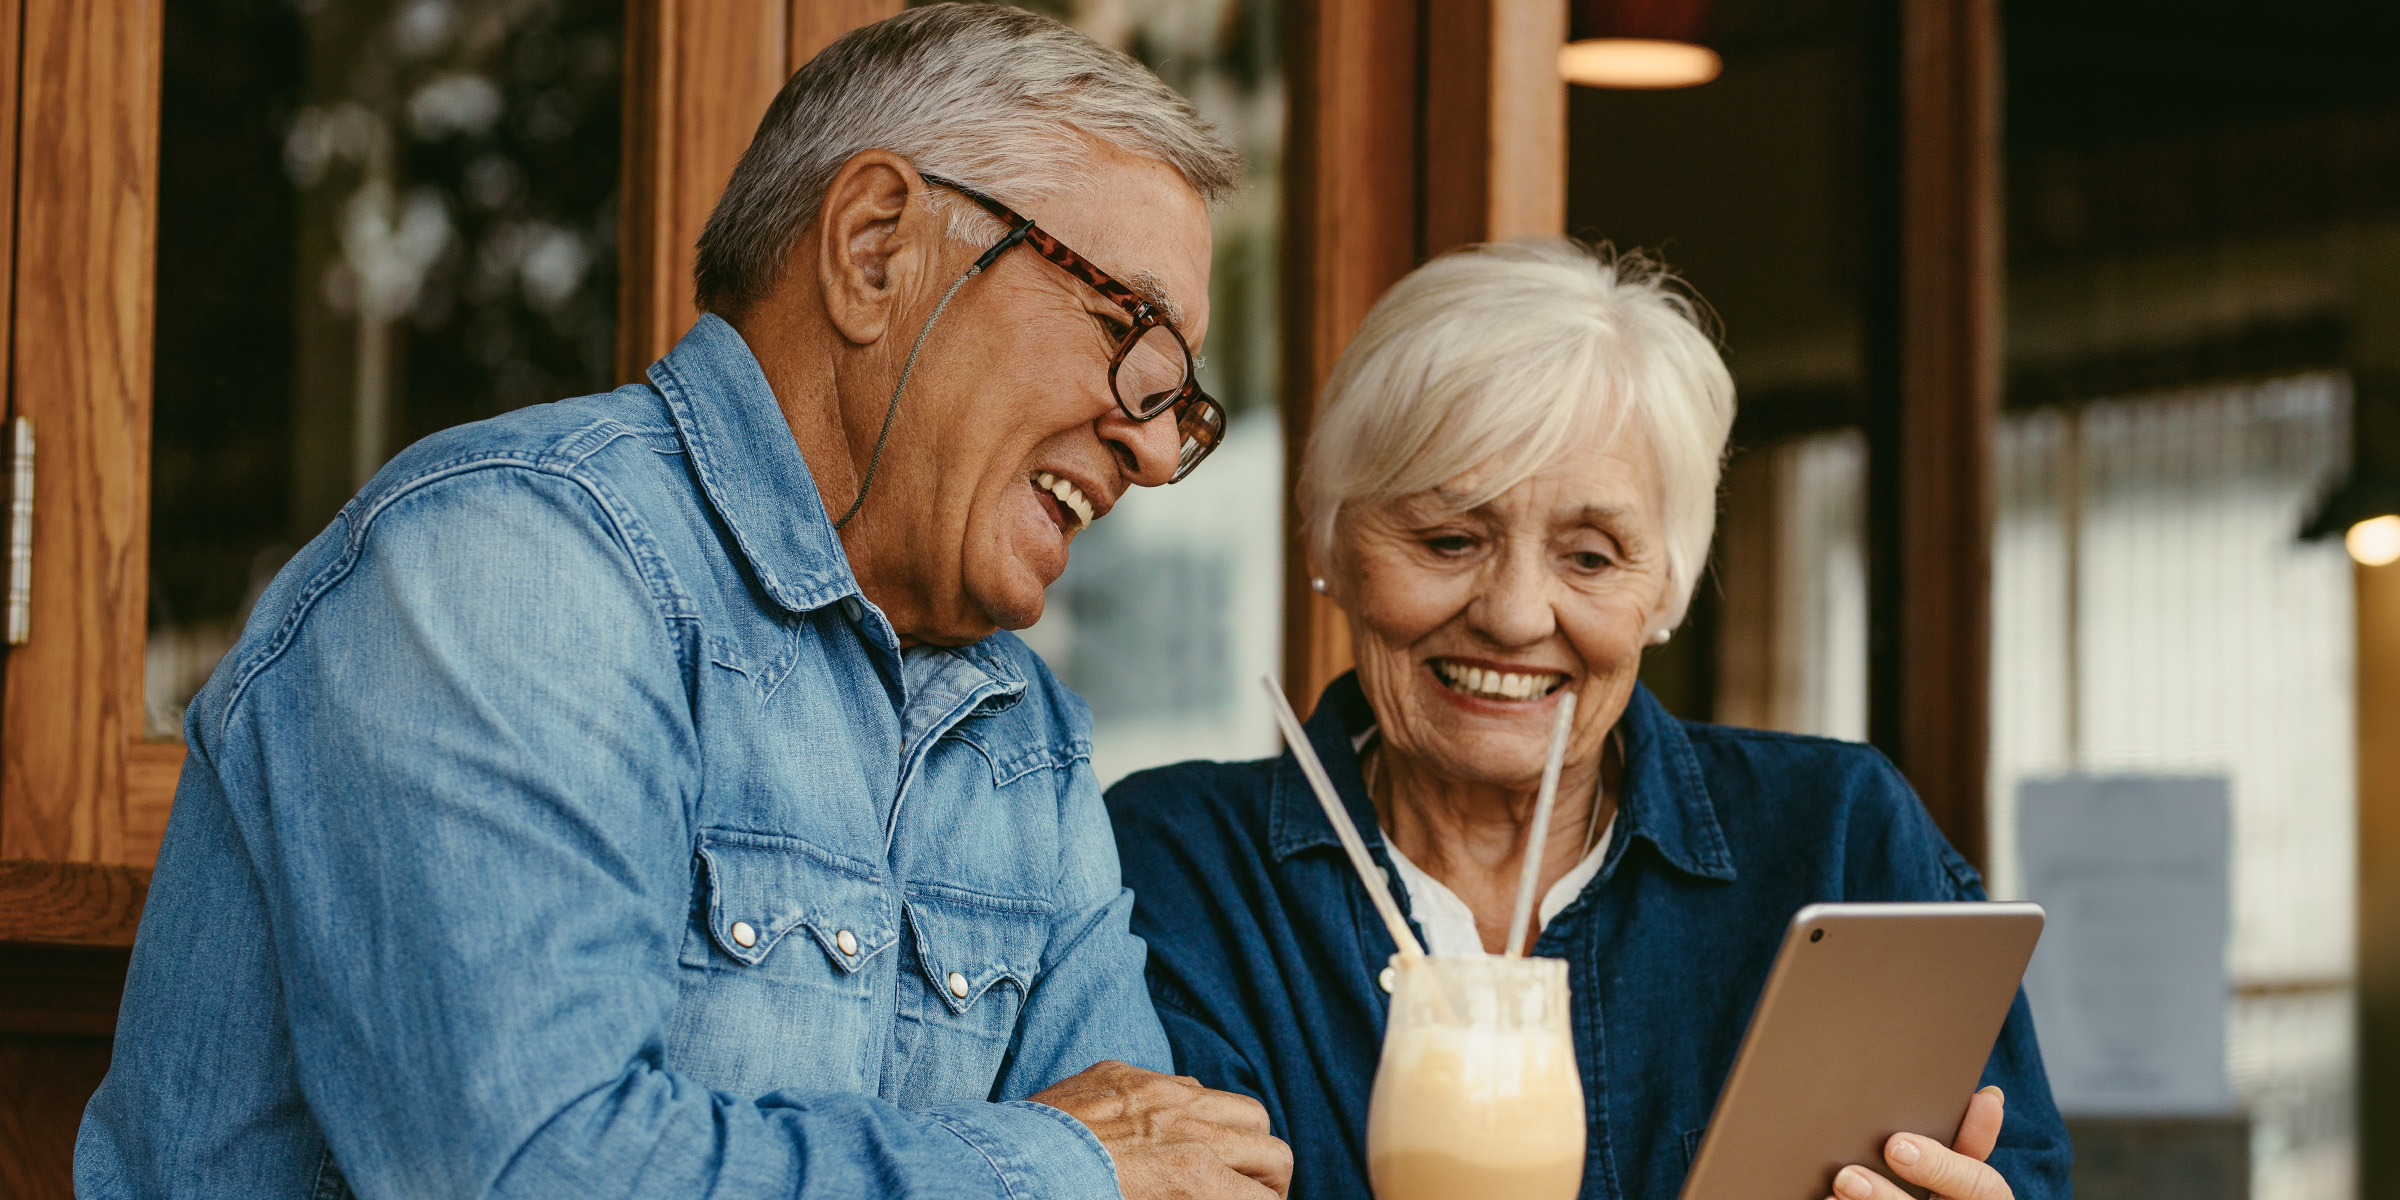 A happy elderly couple looking at a tablet | Source: Shutterstock